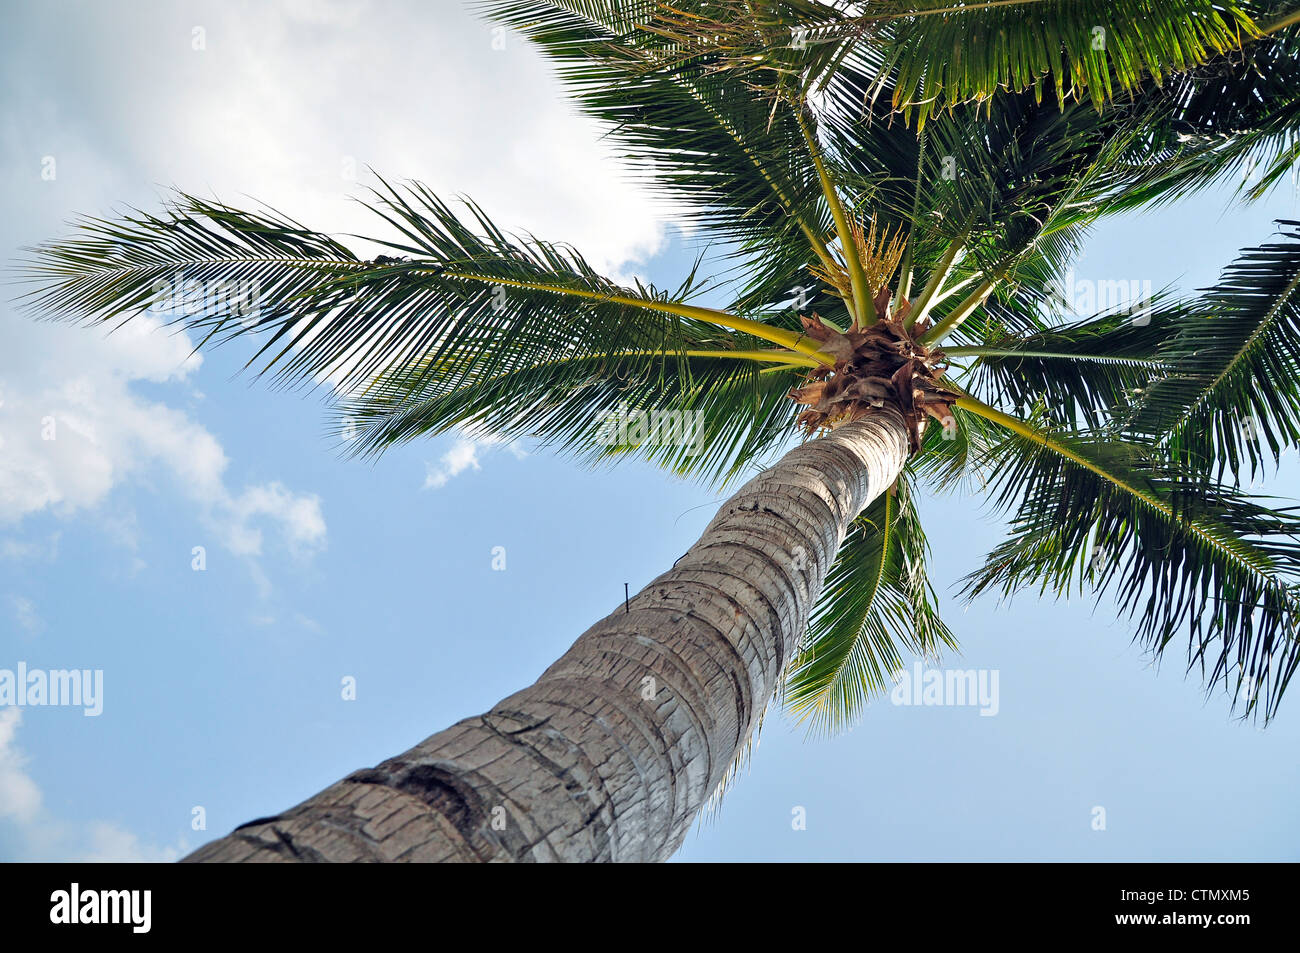 Coconut trees or Palms trees against bright blue sky Stock Photo